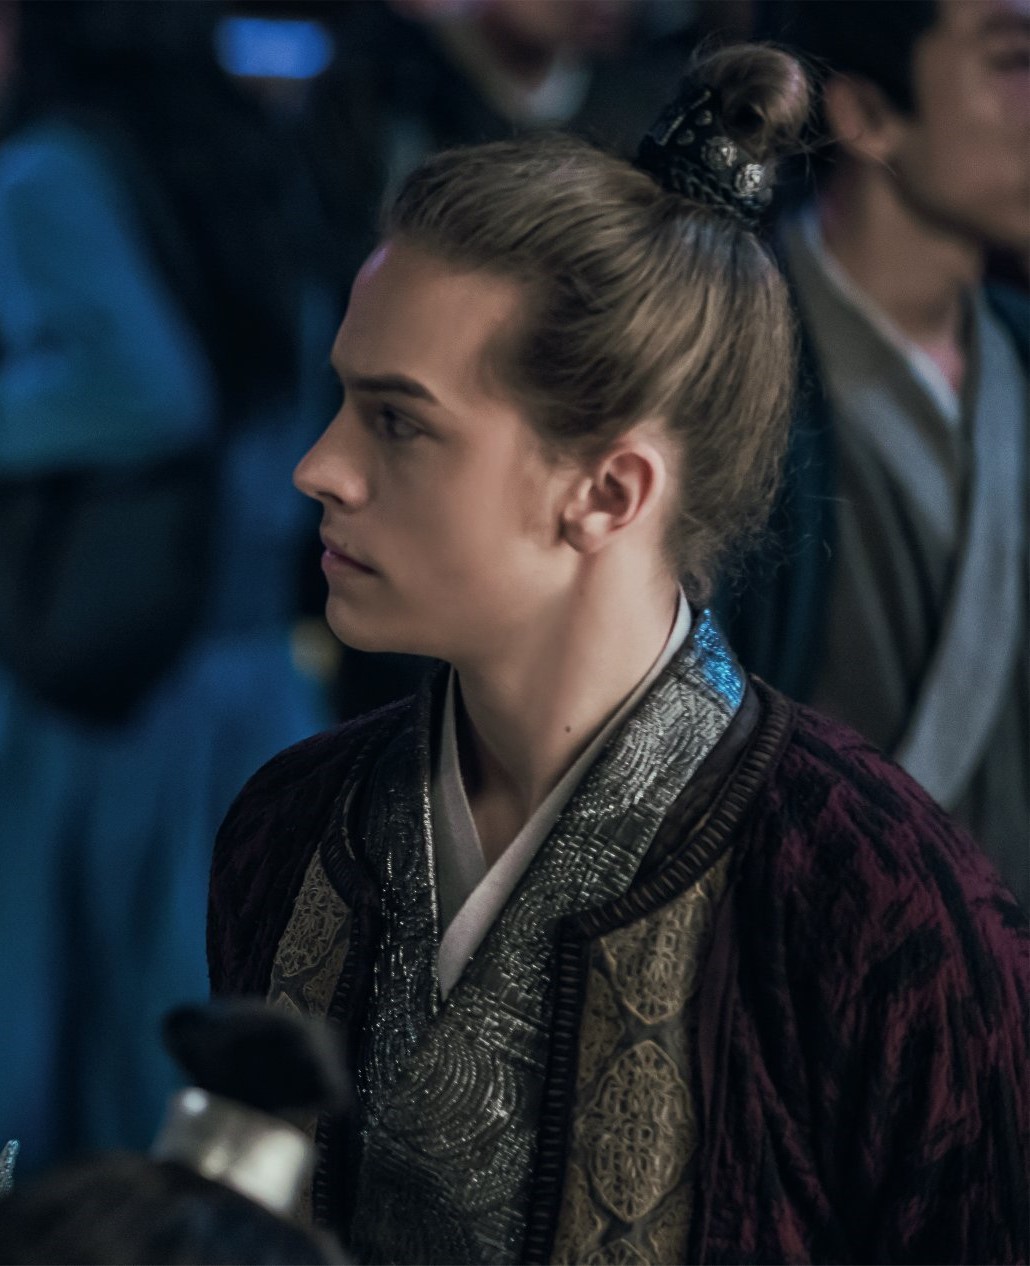 Dylan Sprouse in The Curse of Turandot